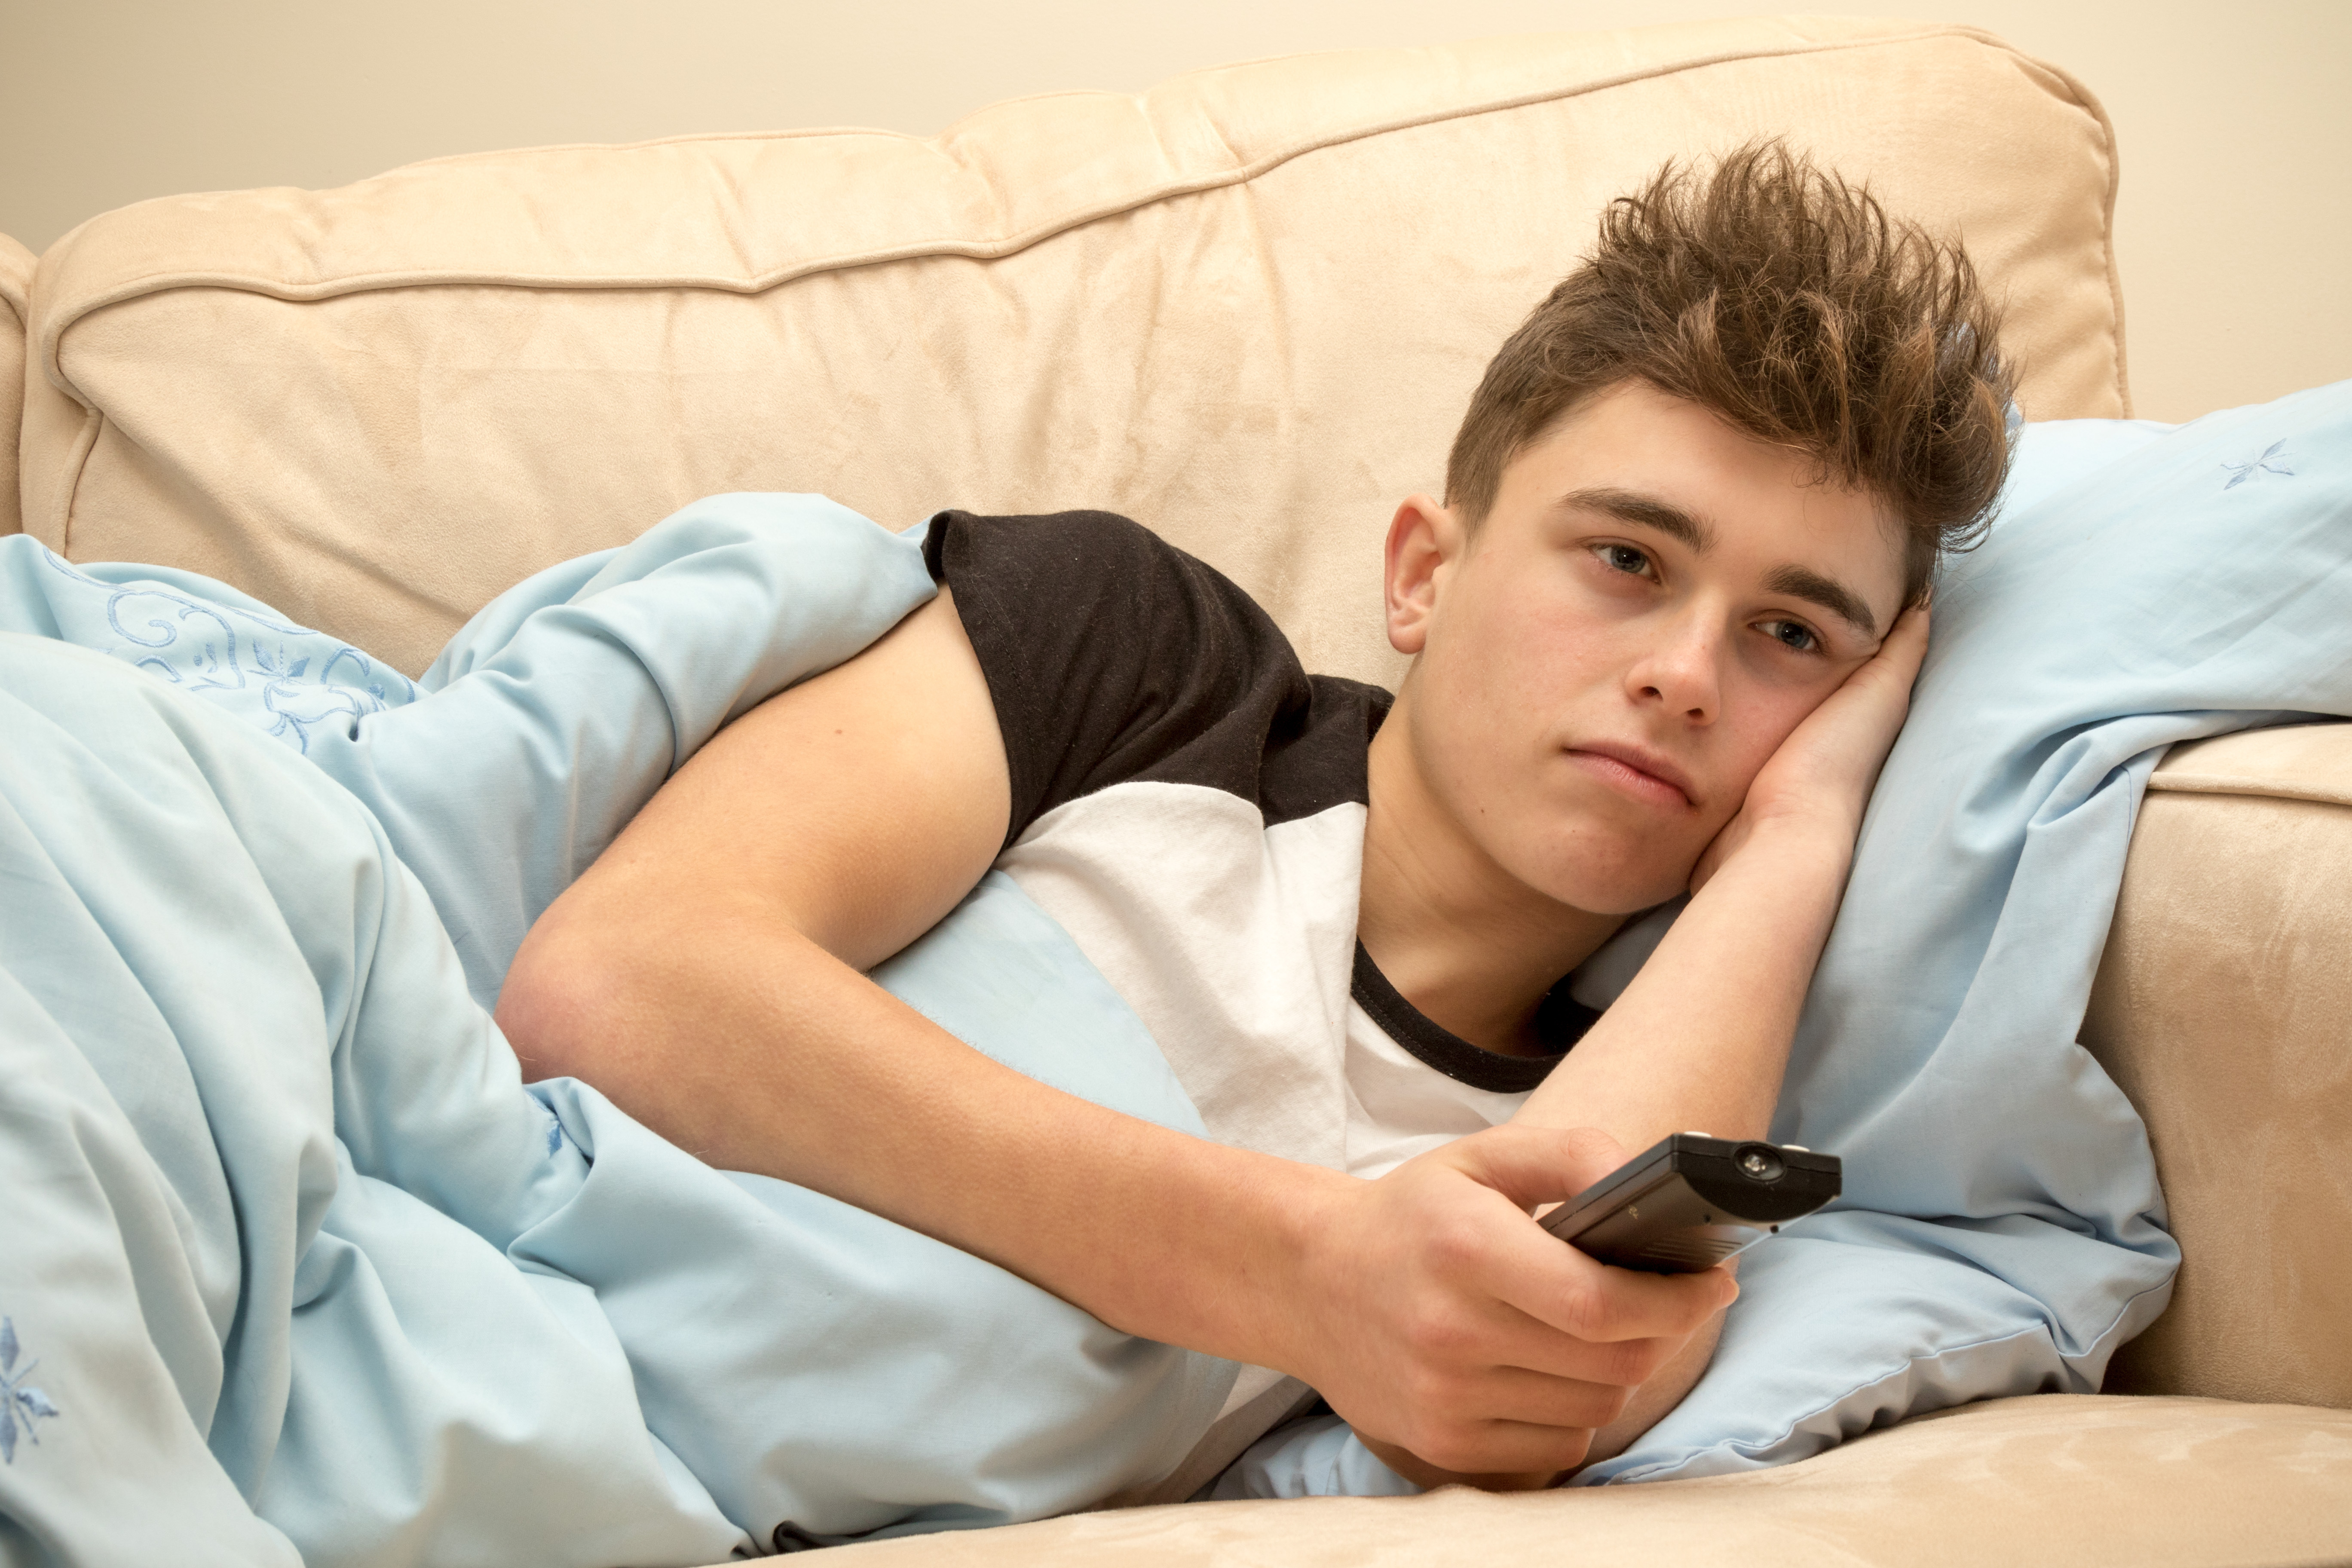 A lazy young man watching TV on a sofa | Source: Shutterstock